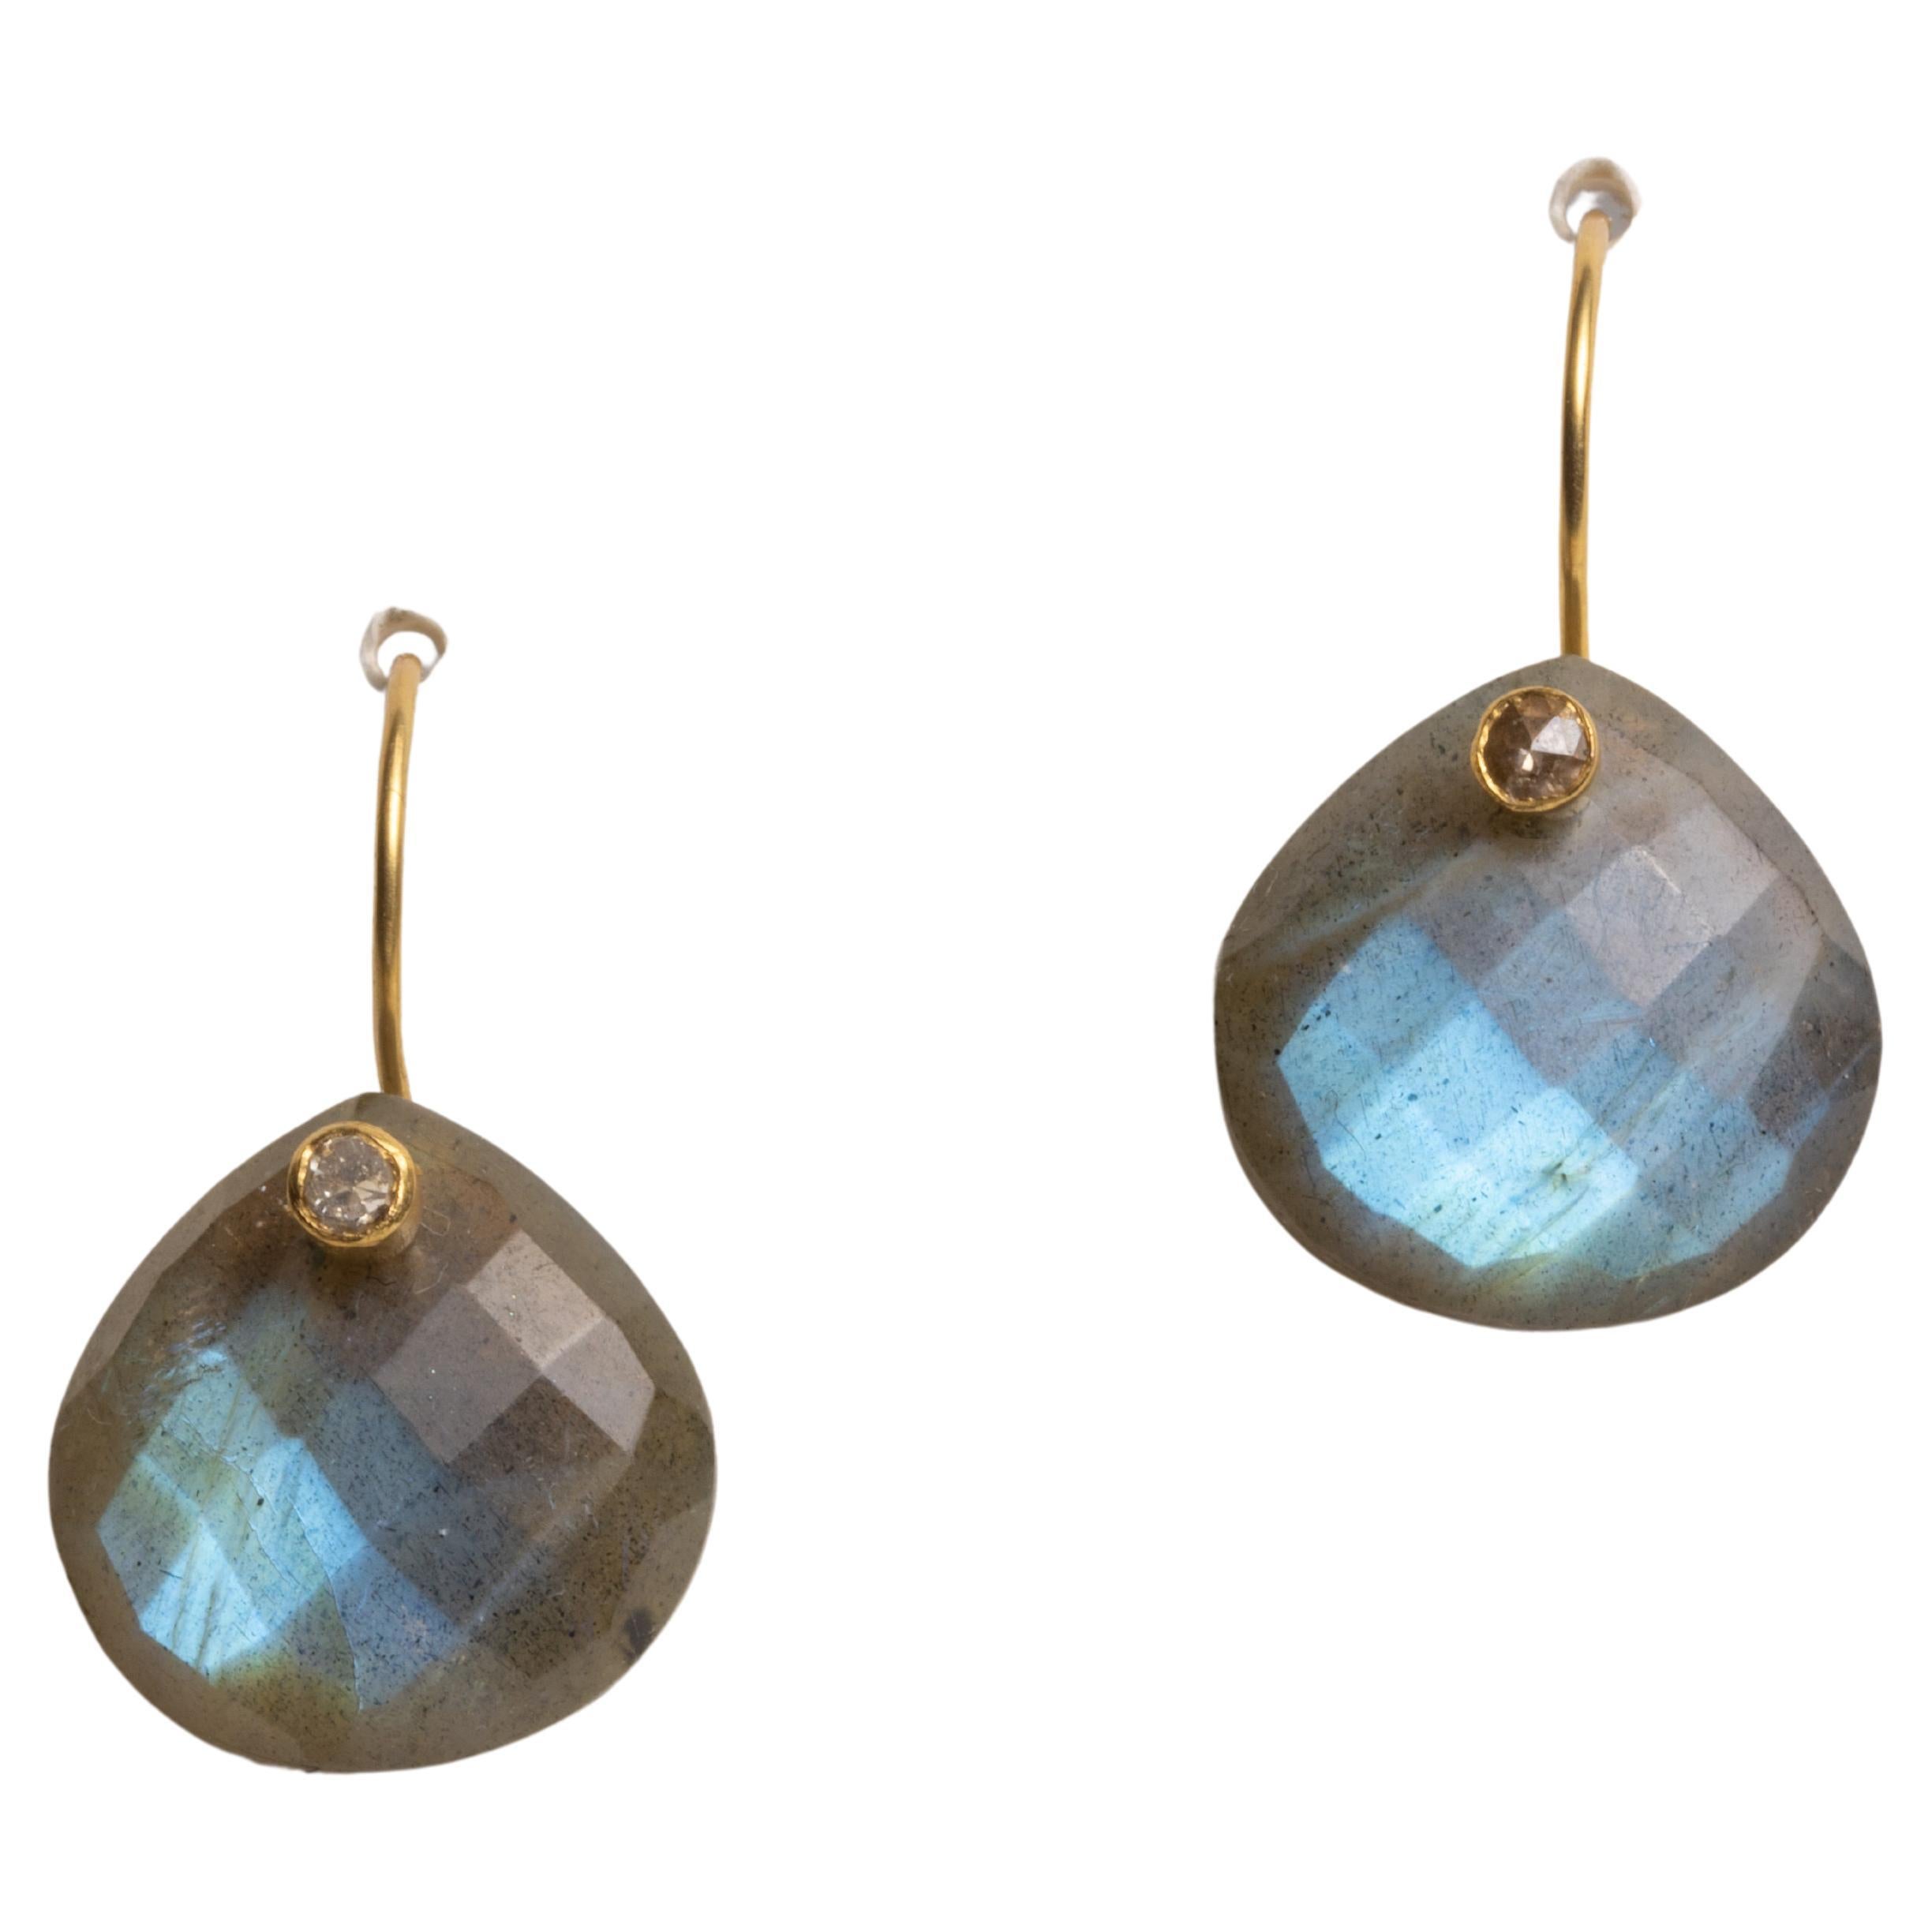 Faceted Labradorite and Diamond Drop Earrings